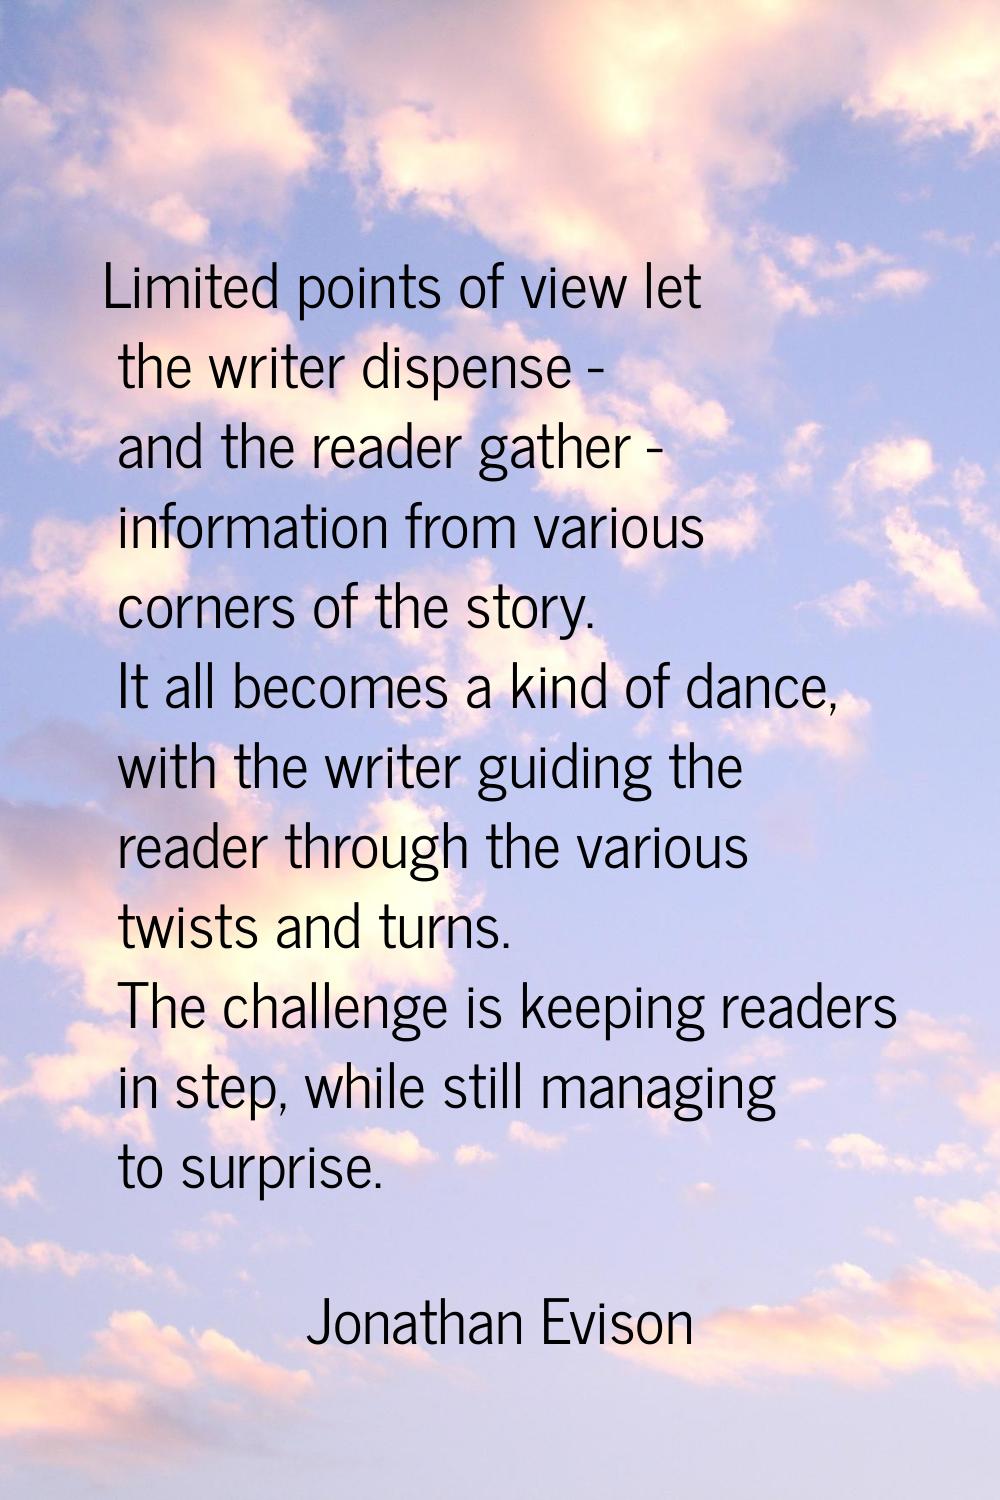 Limited points of view let the writer dispense - and the reader gather - information from various c